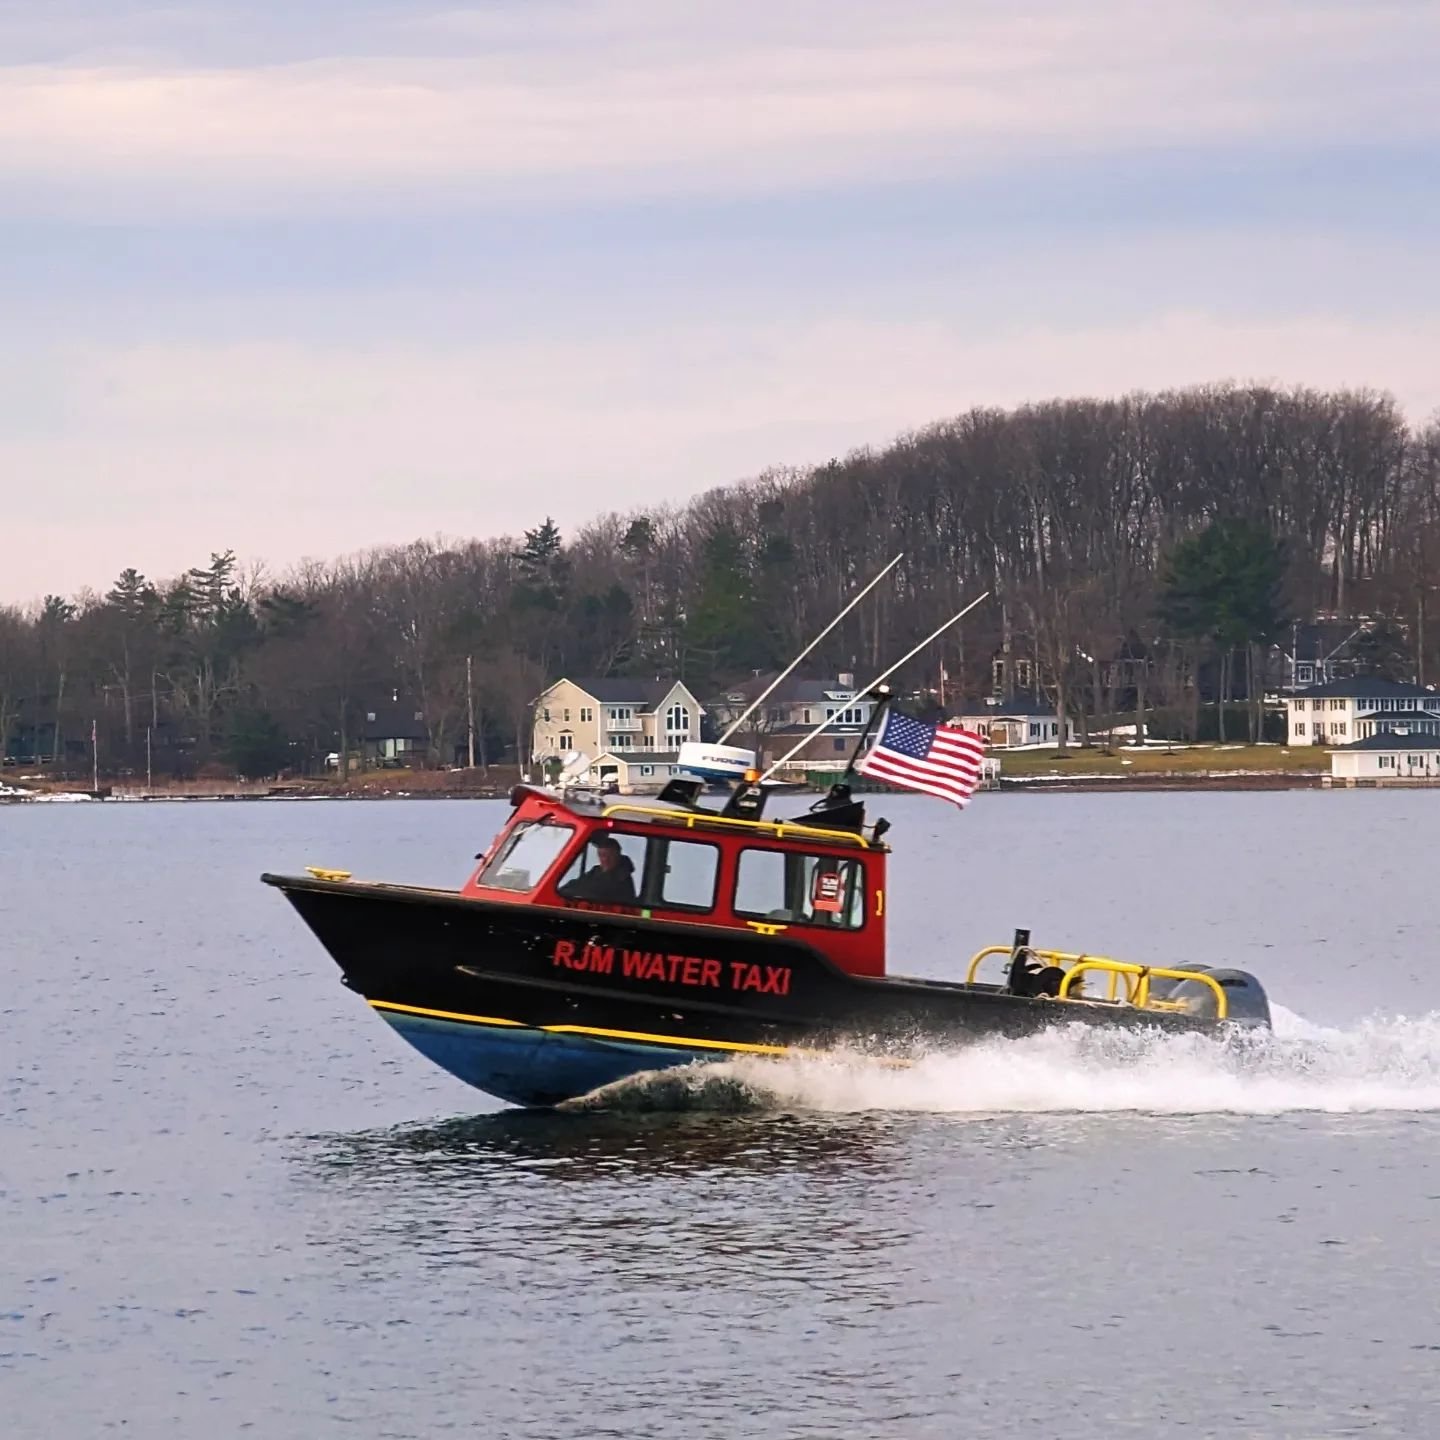 Our water taxi is year round and ready to help! With our day reaching 55&deg;F, we can't wait for the season to get going! 

Available at 315/777.6059 for the #rjmwatertaxi